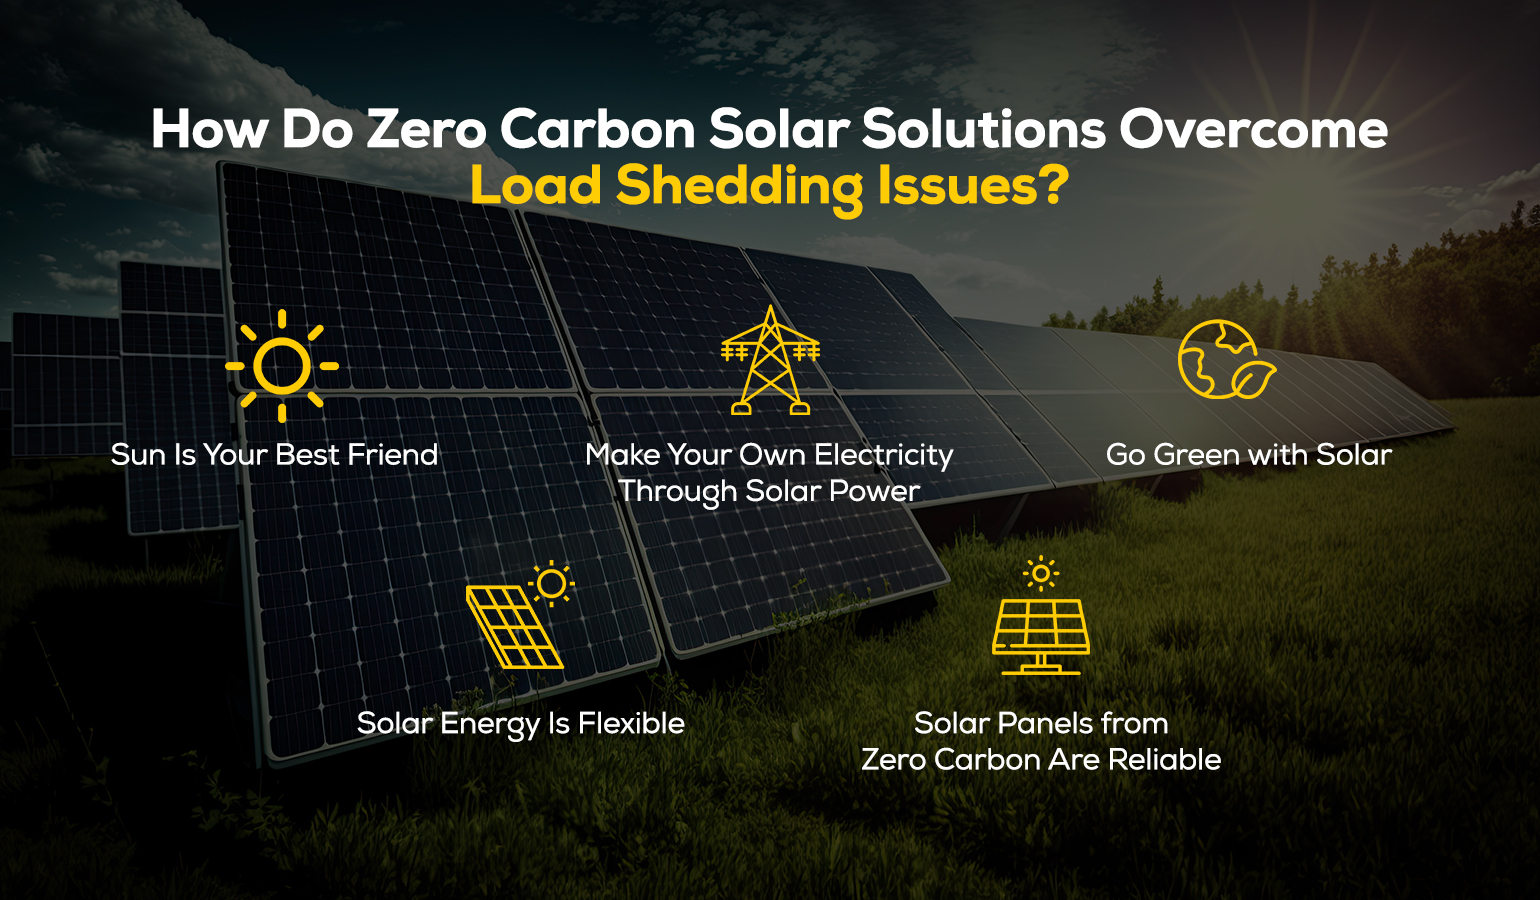 How Do Zero Carbon Solutions Overcome Load Shedding Issues?